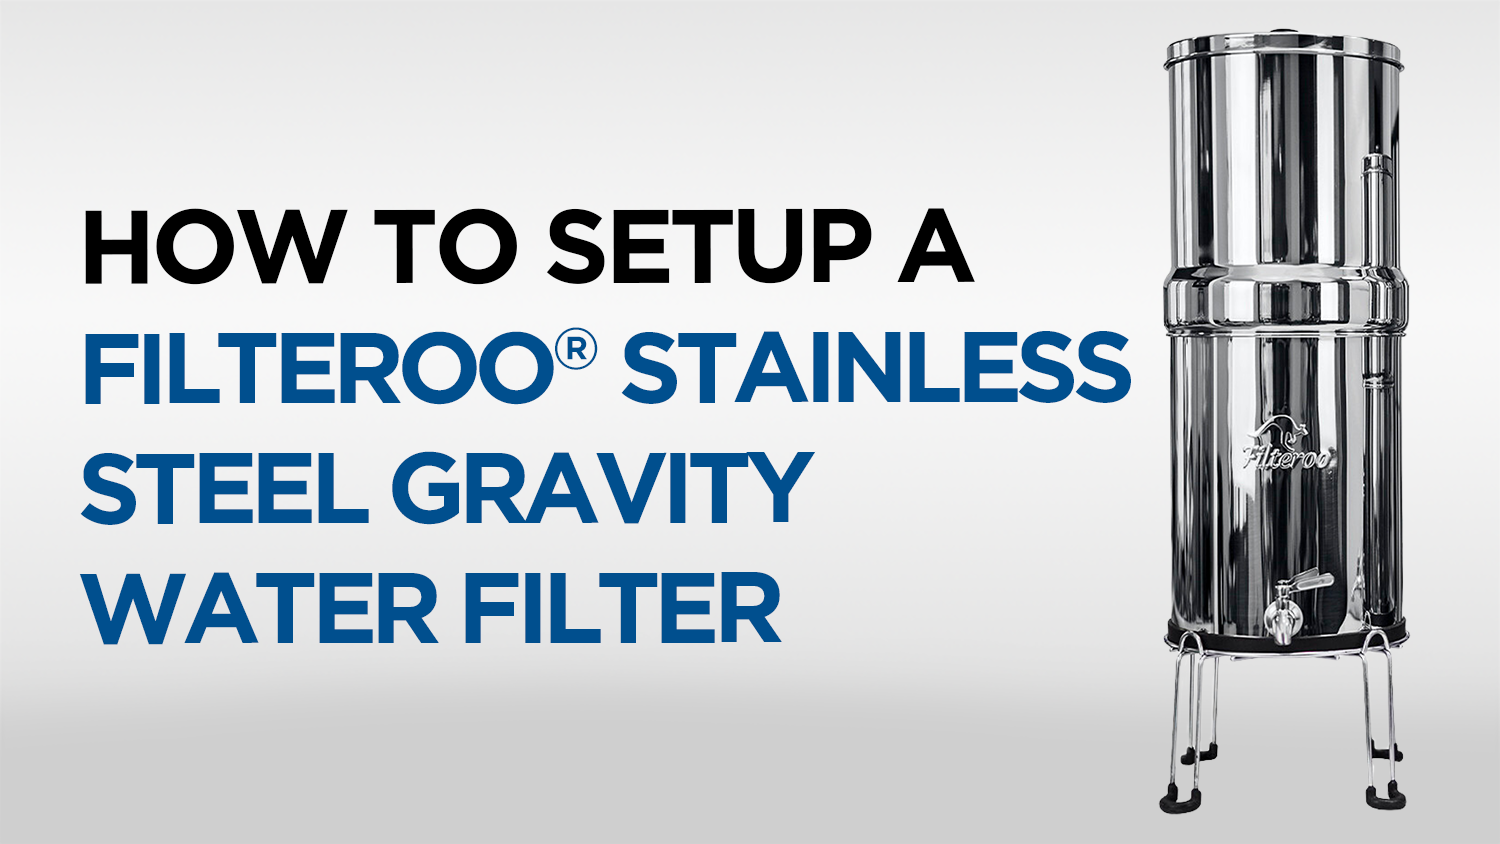 How To Setup A Filteroo Steelroo Stainless Steel Gravity Water Filter